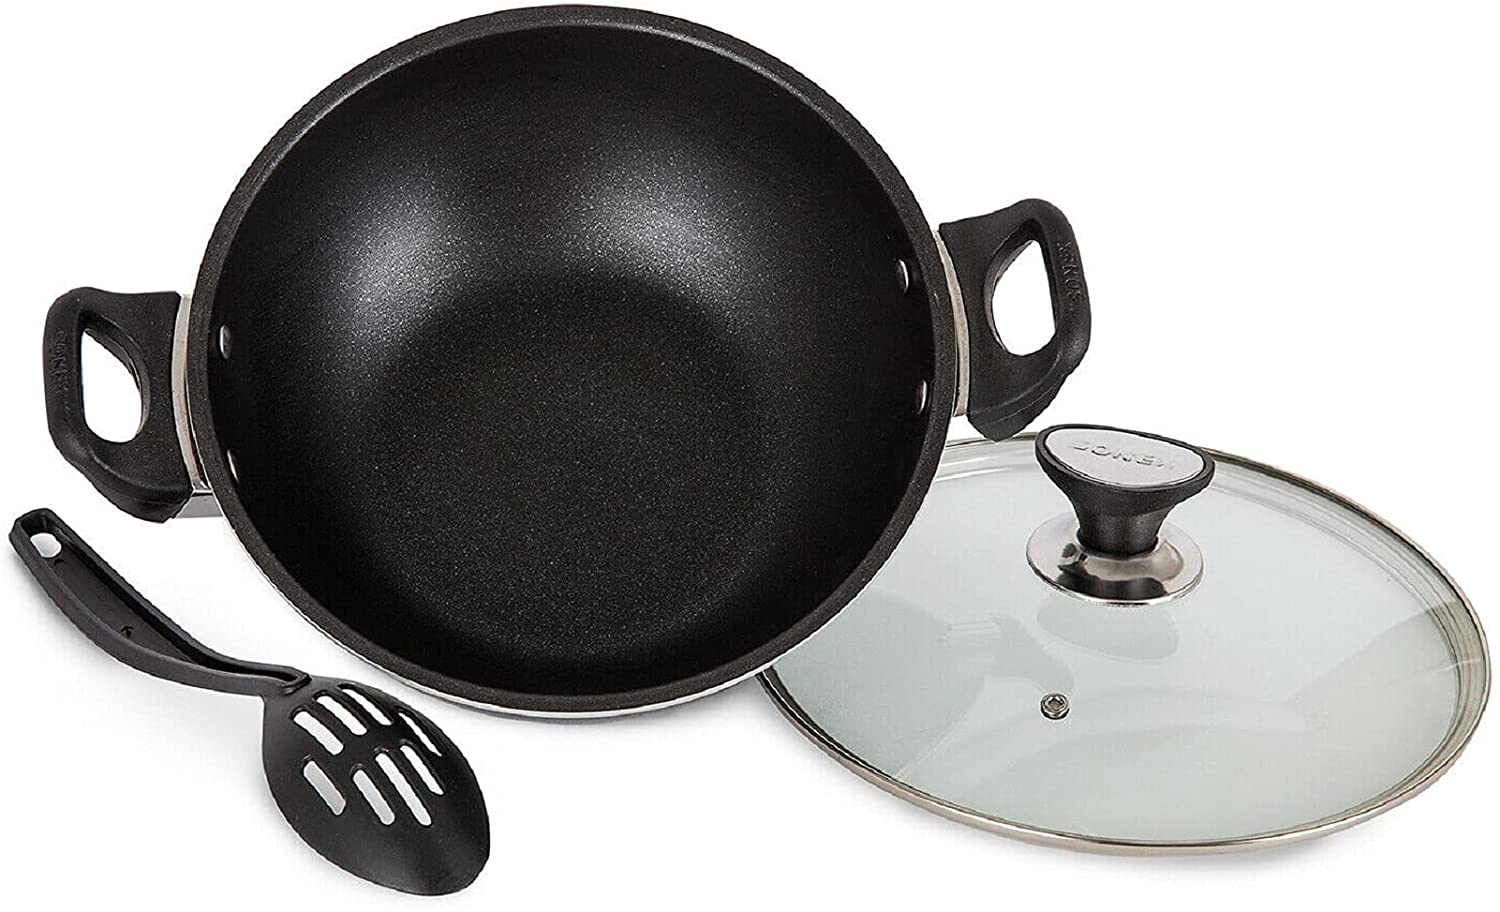 Heavy Material | Dishware Safe | Sonex | Non Stick | Cooking Wok | Kadhai | Karahi | with Glass Lid and Spoon Durable Soft Handles 32 Cm | Easy To Clean | Original Made In Pakistan – 50051